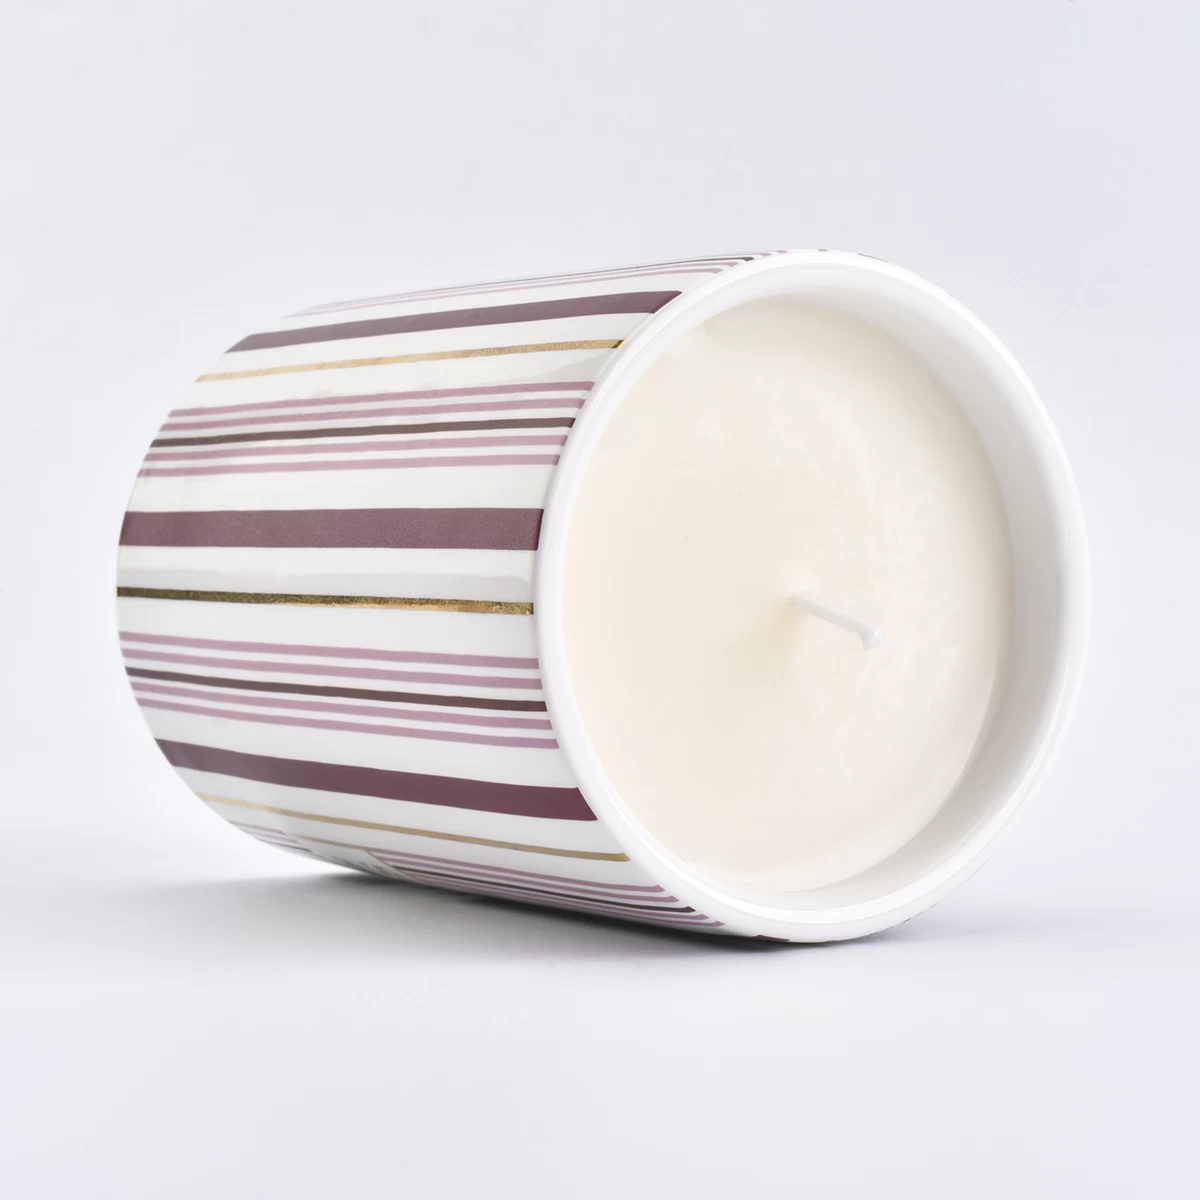 ceramic candle vessel with stripe pattern